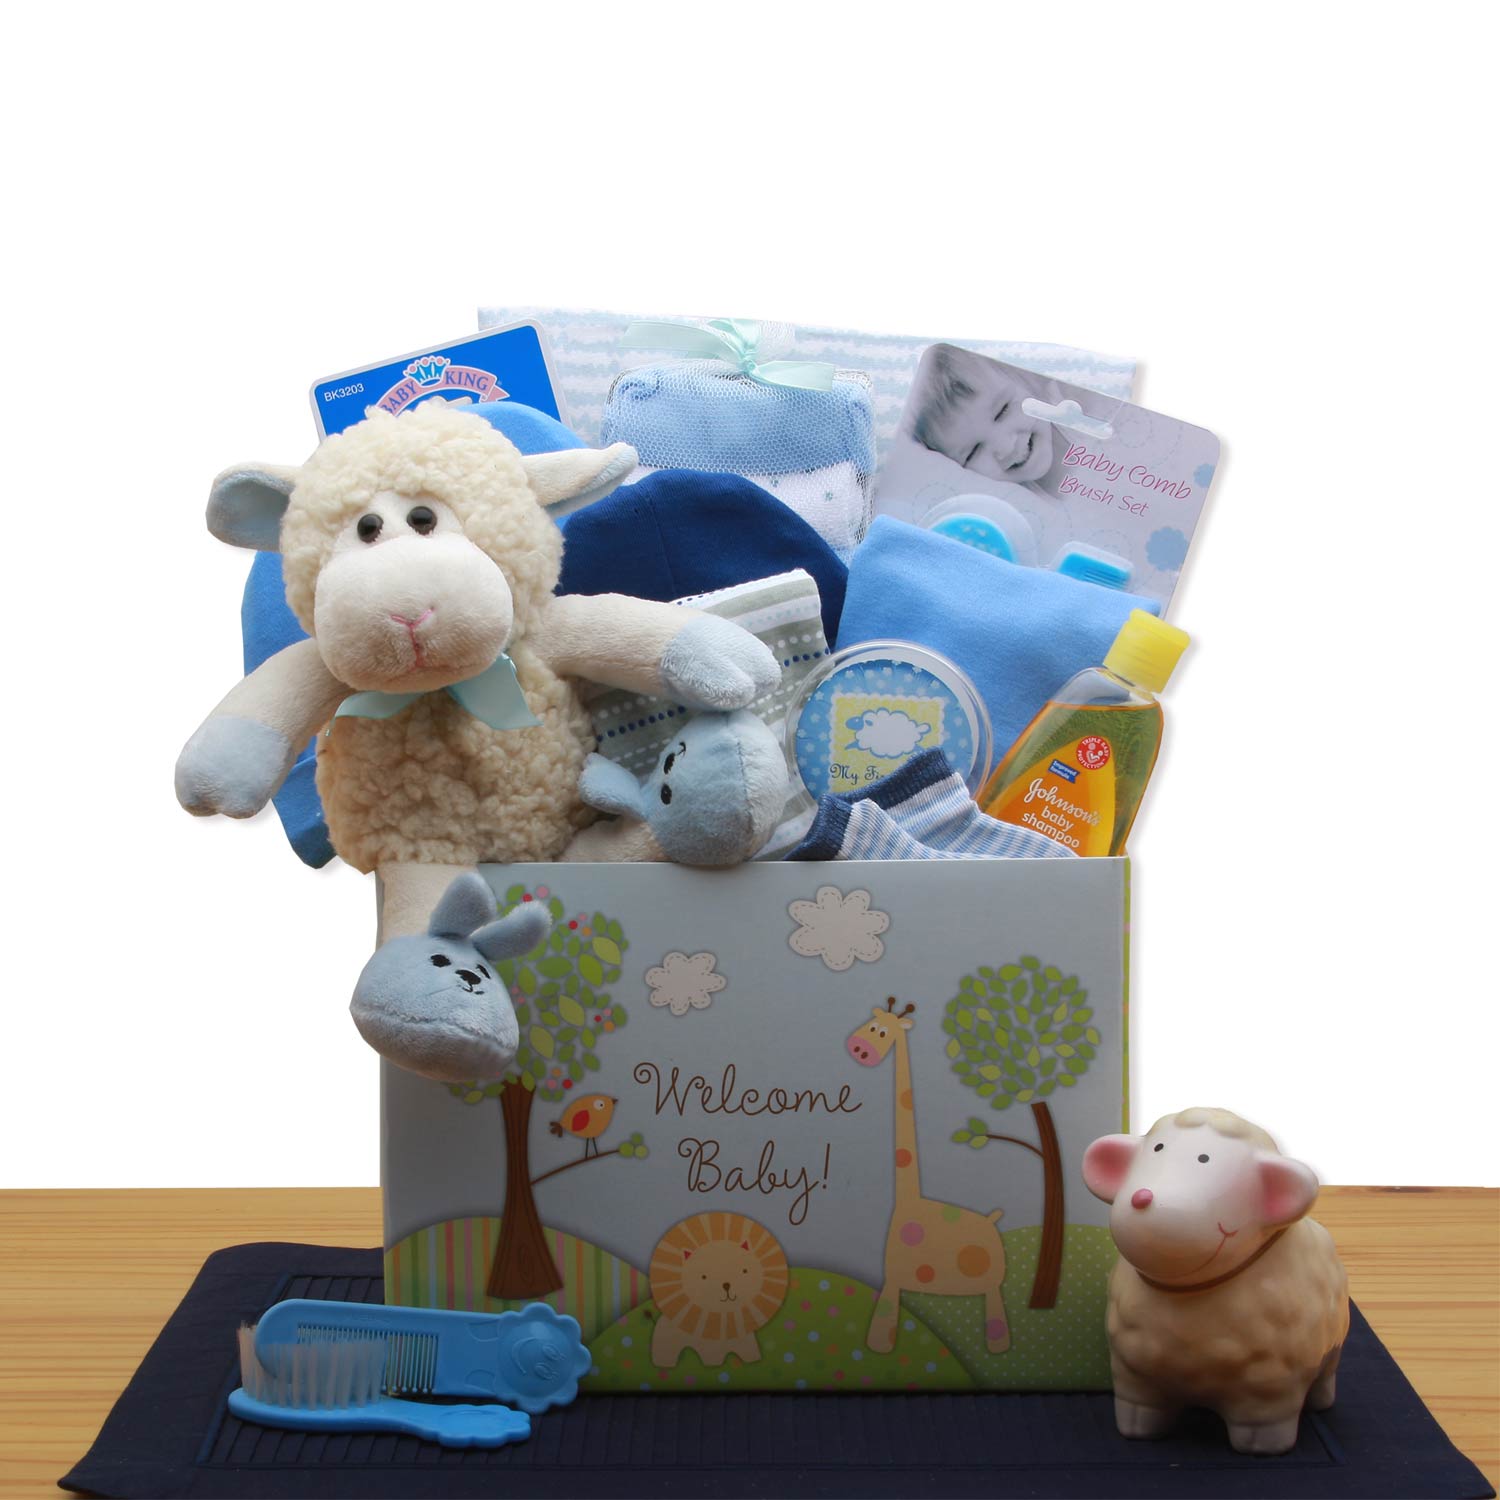 Welcome New Baby Gift Box - Blue - baby bath set -  baby boy gift basket - new baby gift basket - baby gift baskets - baby shower gifts